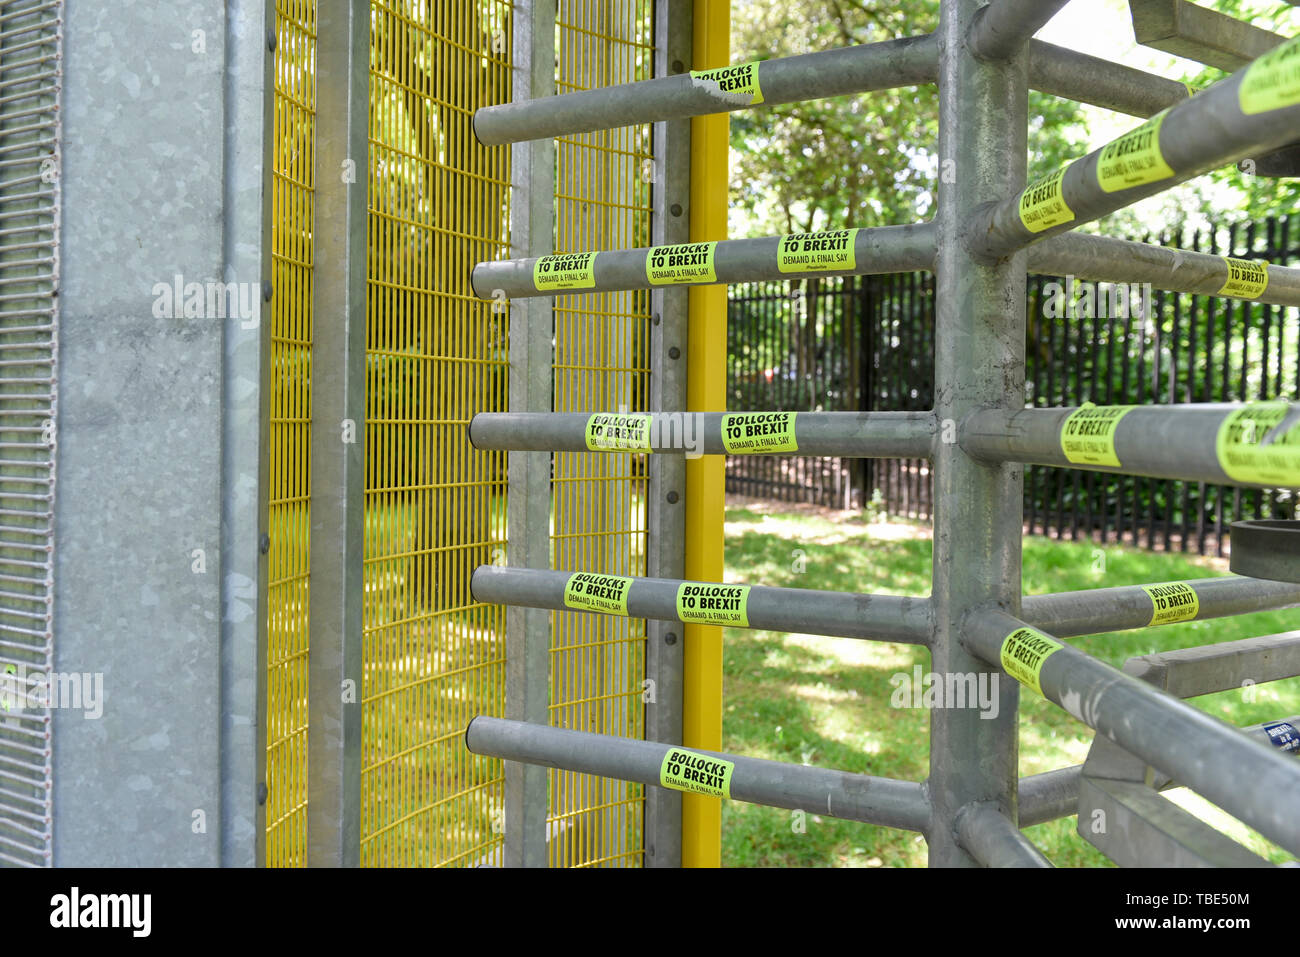 London, UK.  1 June 2019. A gate with anti-Brexit stickers amidst security fences have been installed around Winfield House in Regent's Park ahead of the State Visit of President Donald Trump.  Winfield House is the residence of the Ambassador of the United States of America to the Court of St. James’s and will host the US President during his visit.   Credit: Stephen Chung / Alamy Live News Stock Photo